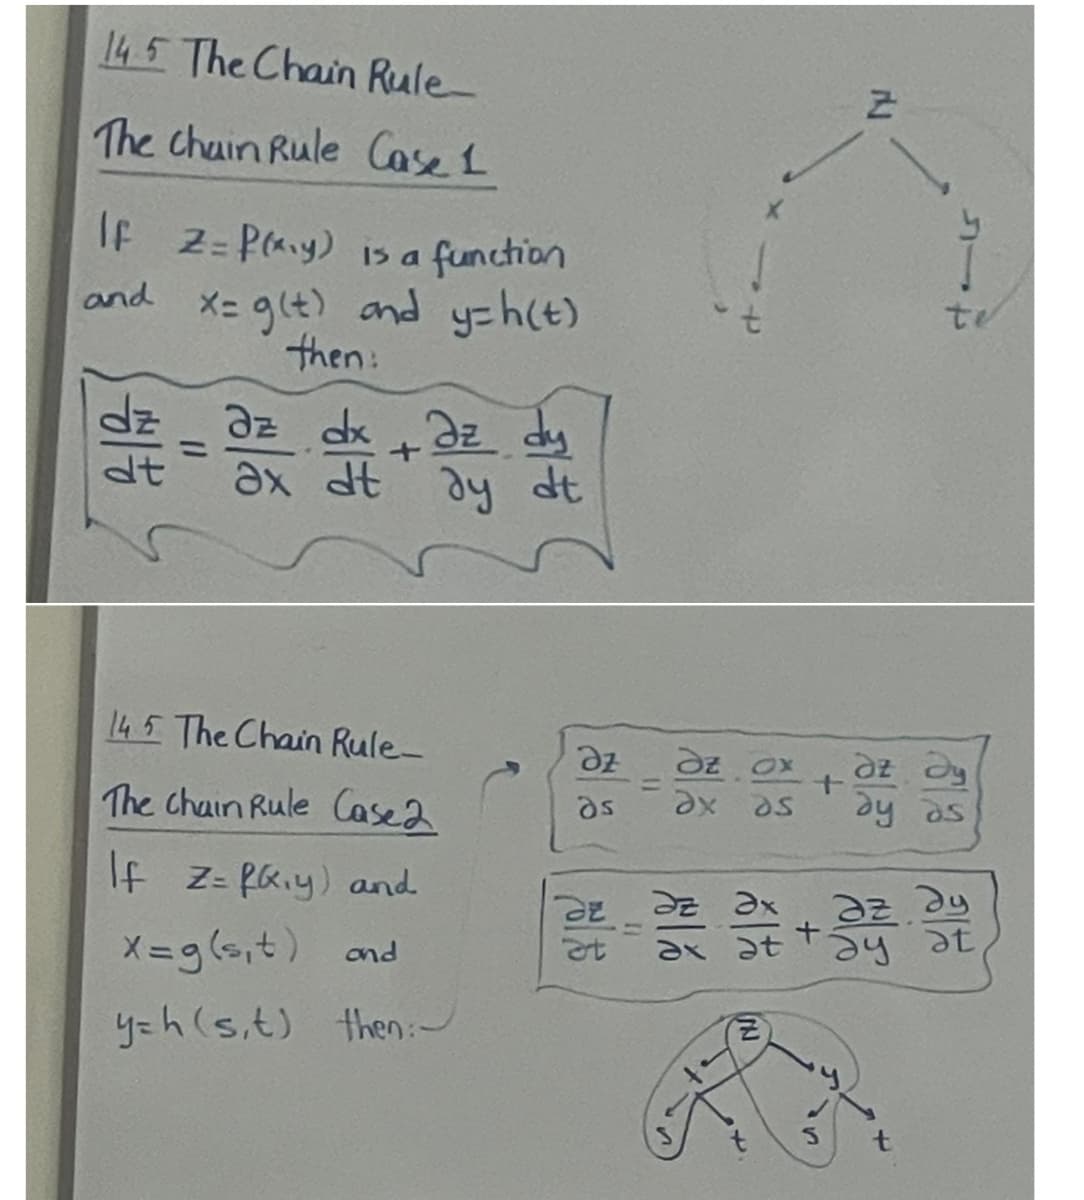 14.5 The Chain Rule-
The Chain Rule Case 1
If Z= P(x₁y) is a function
and x= g(t) and y=h(t)
then:
#
dt
Əz dx az dy
dy dt
ax dt
14.5 The Chain Rule-
The Chain Rule Case 2
If Z=Rk₁y) and
X=g(s, t) and
y=h (s, t) then:
dz
as
DE
at
az ox
ax as
+
E
Əz Əy
ay as
az ax
az dy
ax at ay at